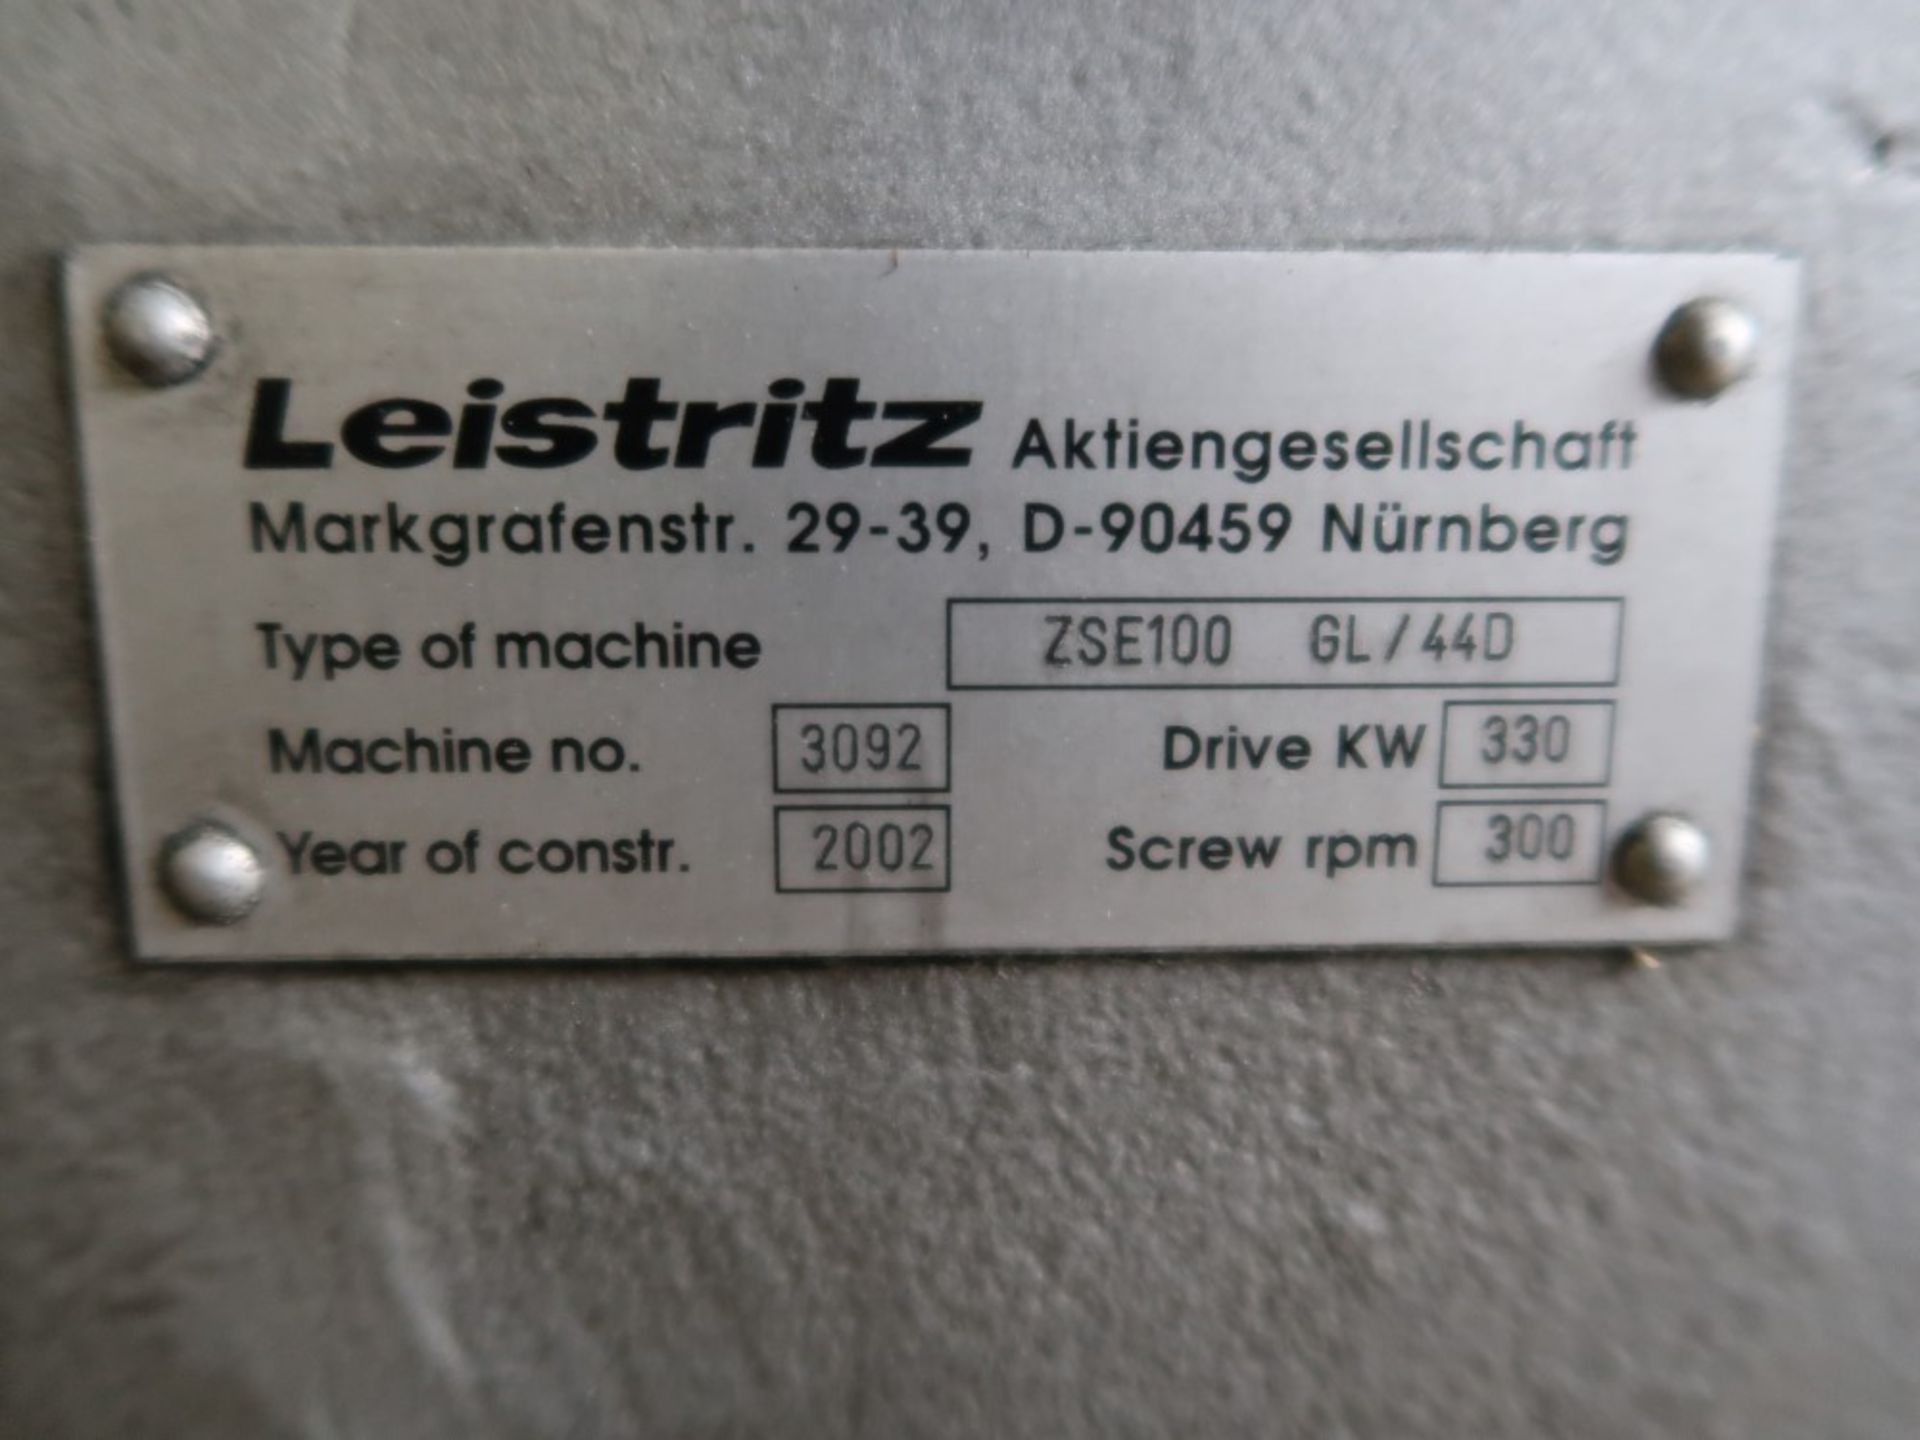 2002 Leistritz Model ZSE 100 GLAAX Co-Rotating Twin Screw Side Feeder - Image 17 of 17